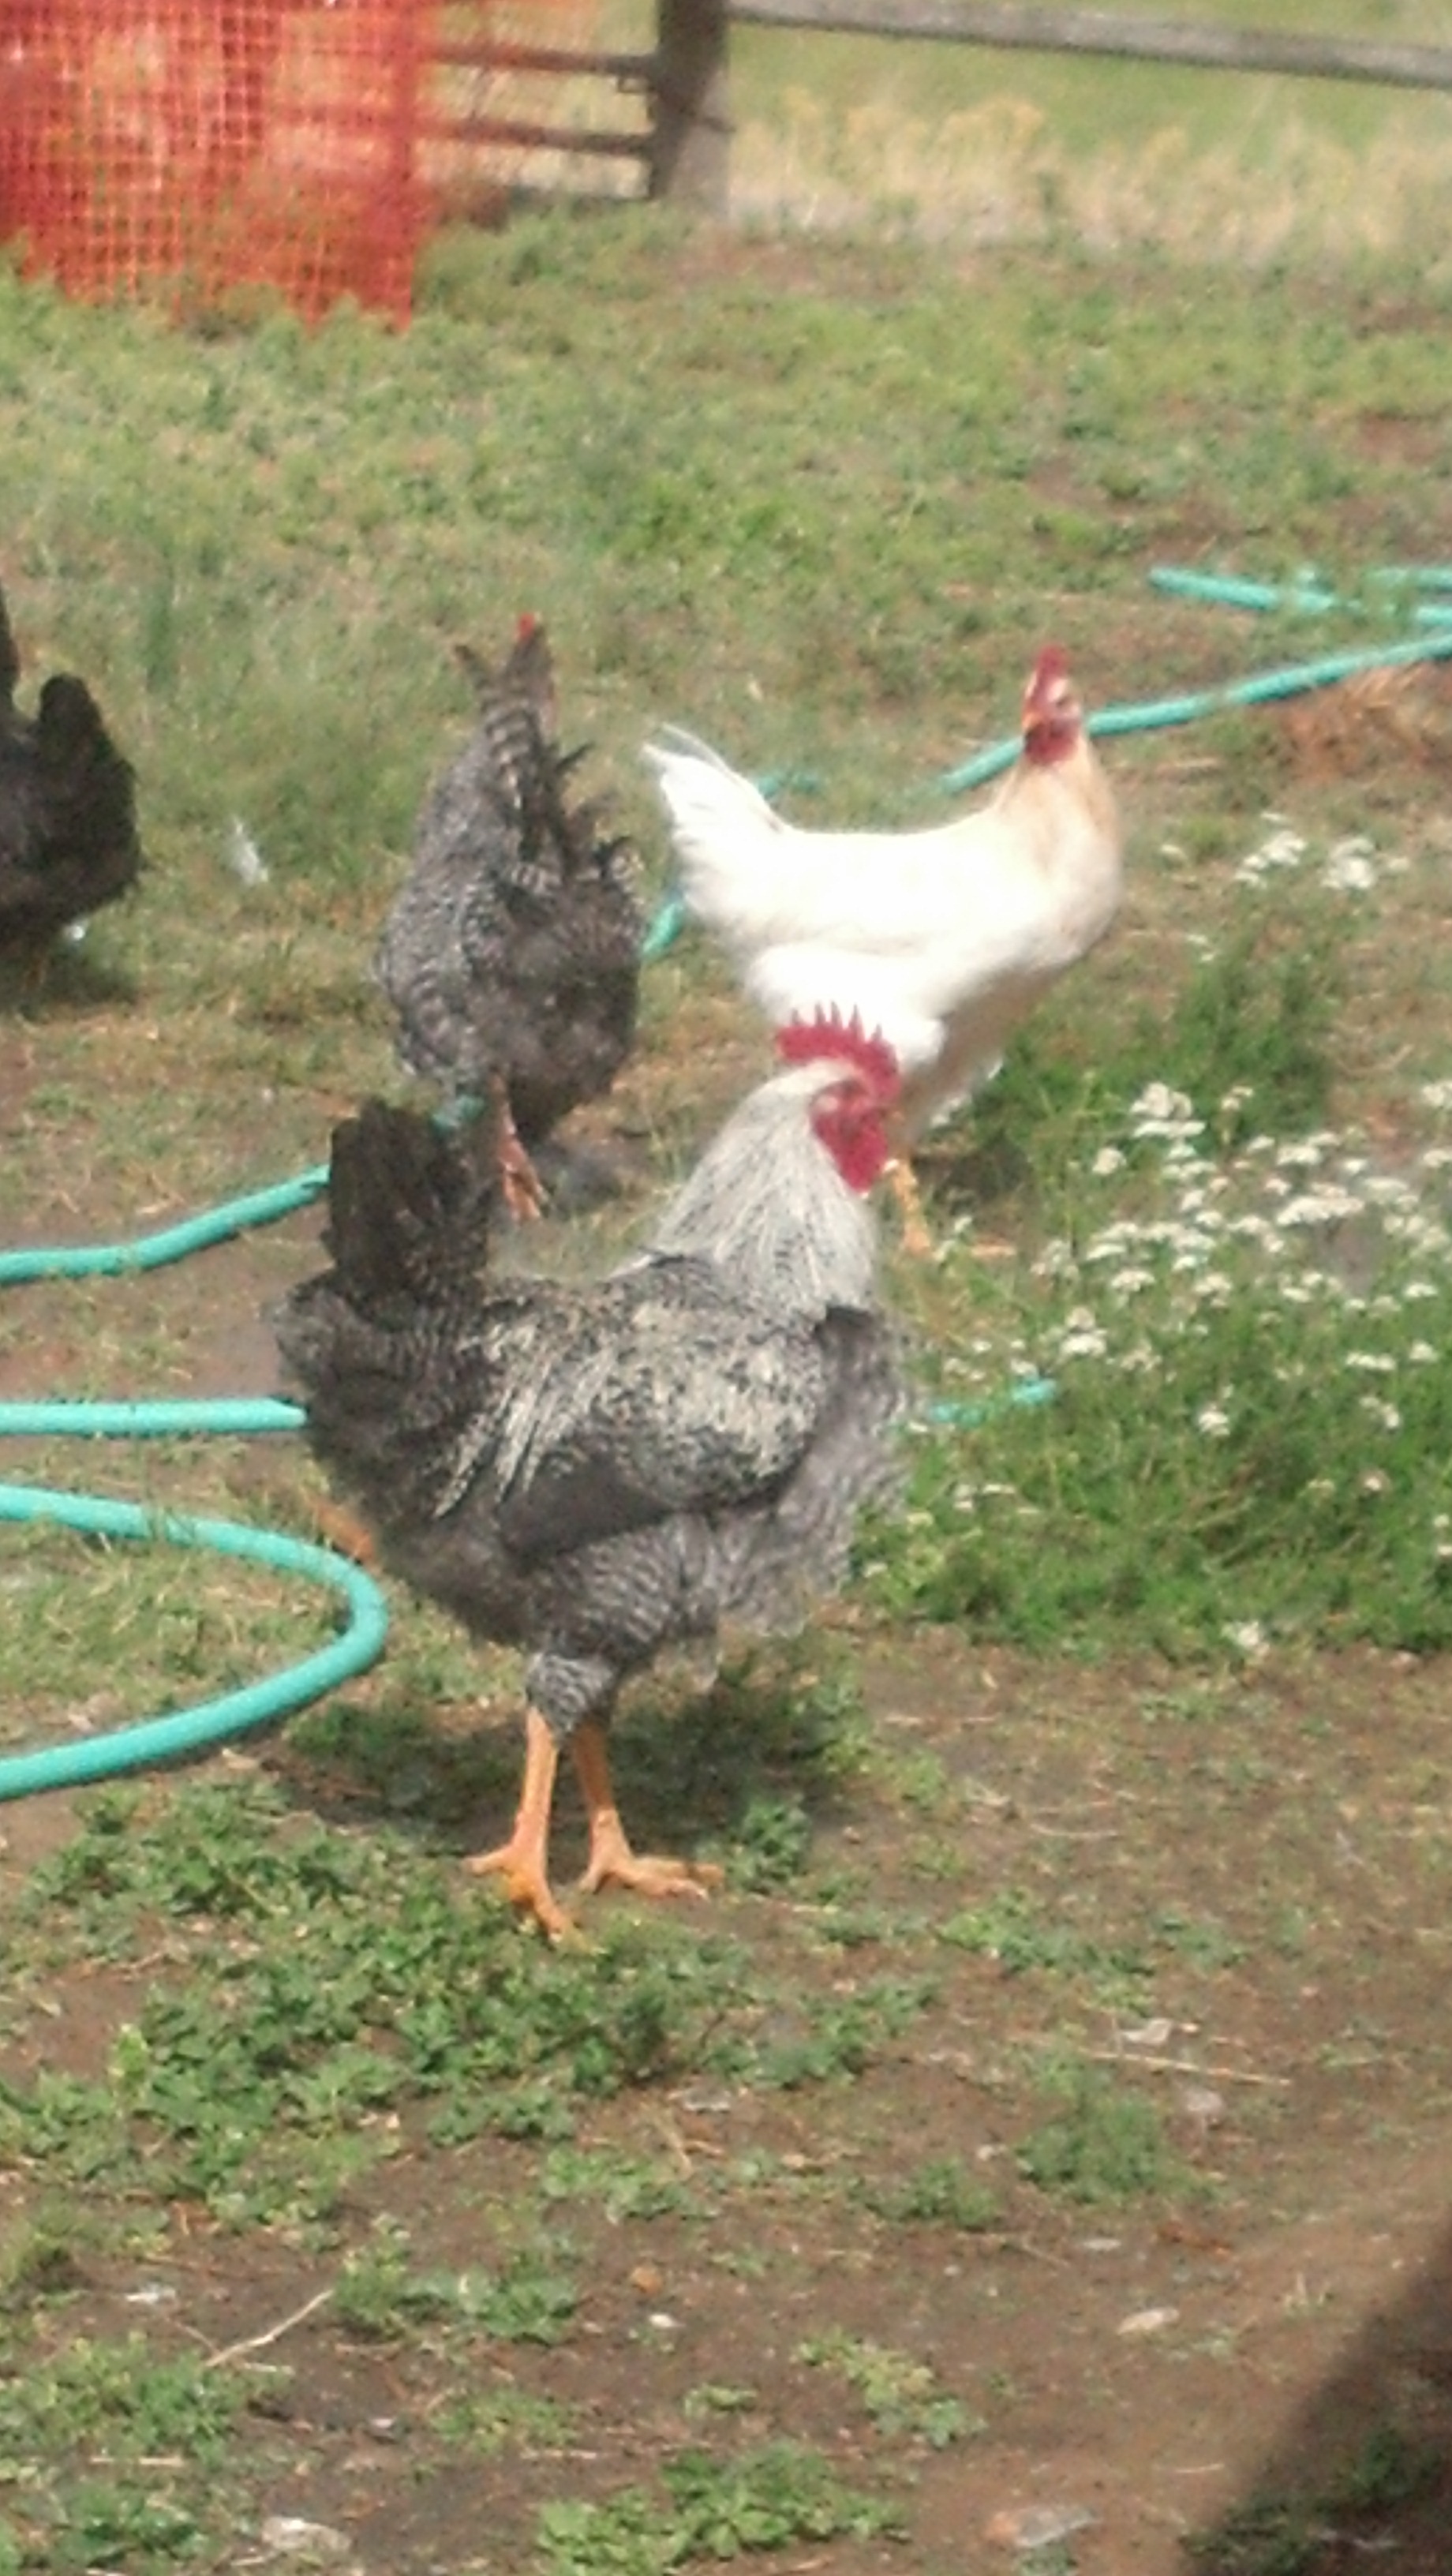 2 of the chicks I raised from my own eggs, under a broody hen.  The yellow one in the back is "Dumb" (headed for Freezer Camp!) and the one in front (Barred Rock/Sexlink) is "Dumber"- planning on keeping him he's so pretty! :)